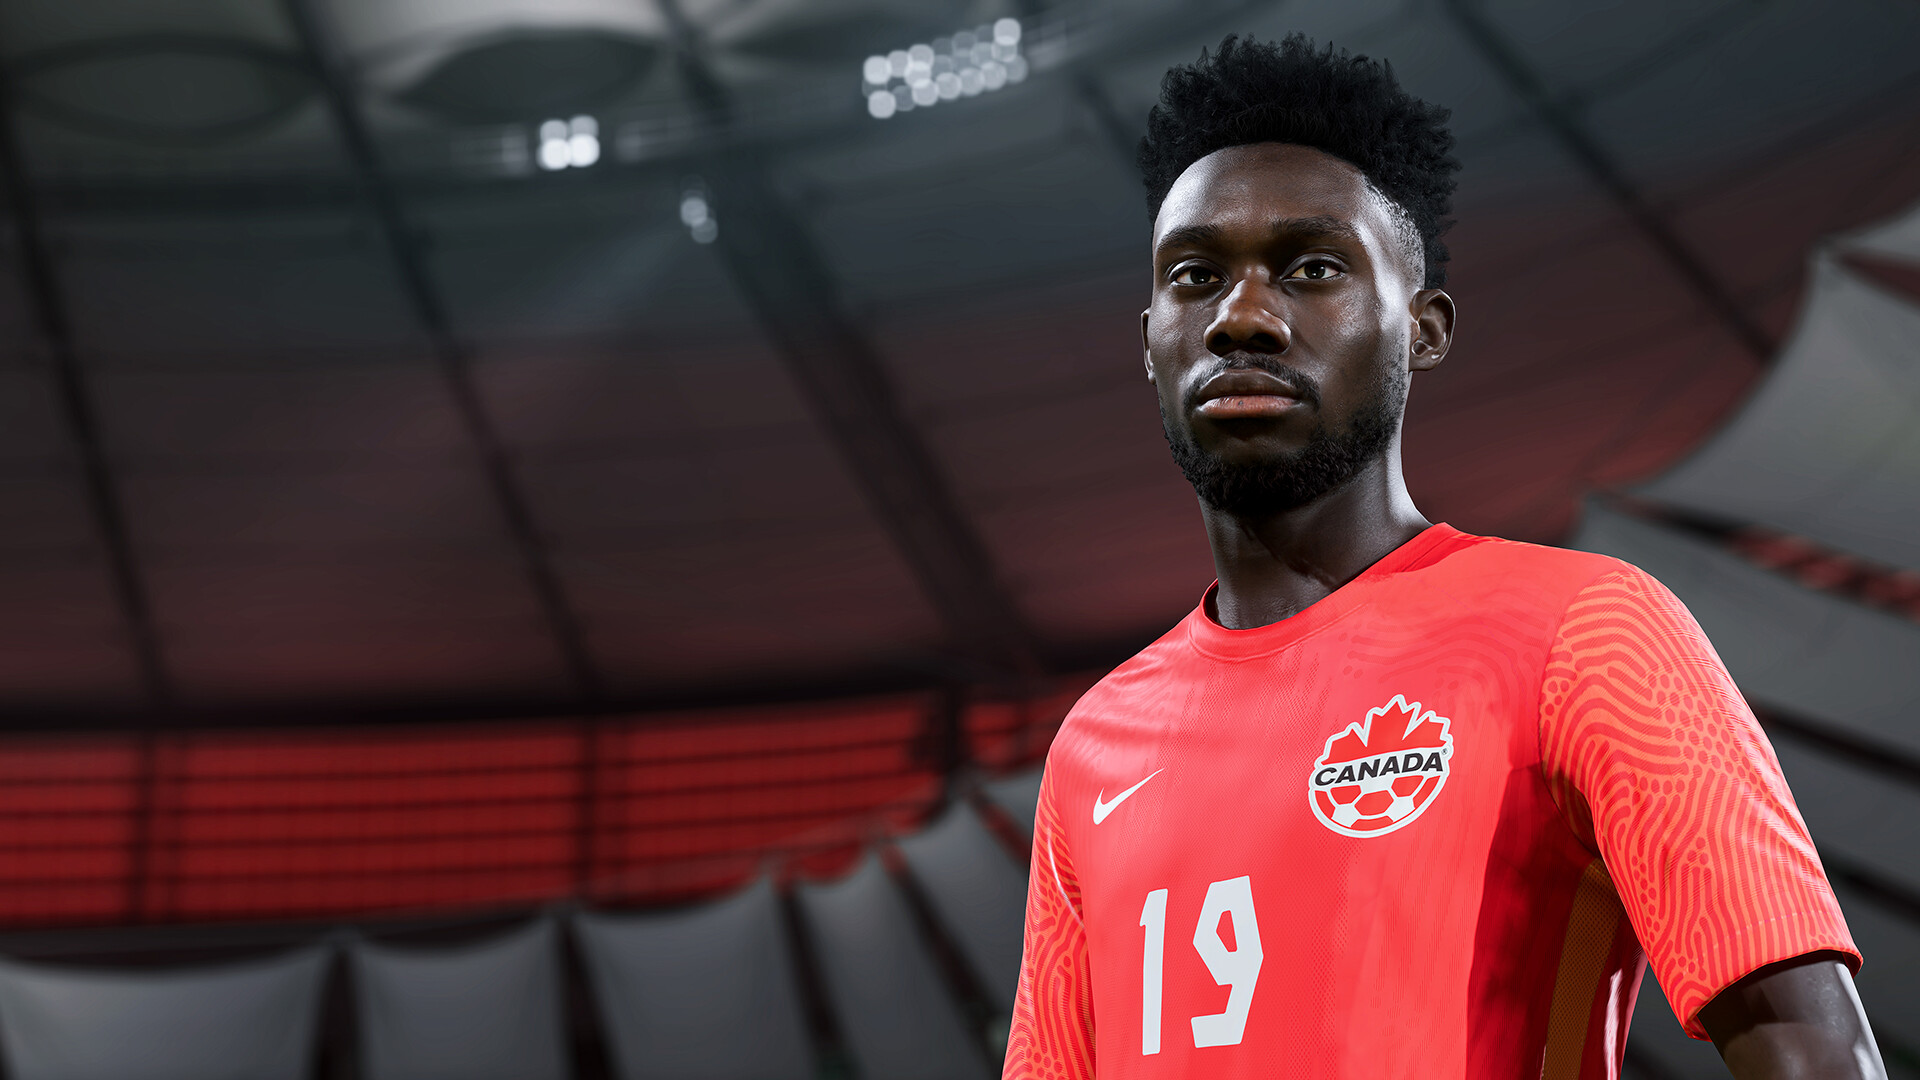 Steam :: EA SPORTS™ FIFA 23 :: Women's Ratings Confirmed